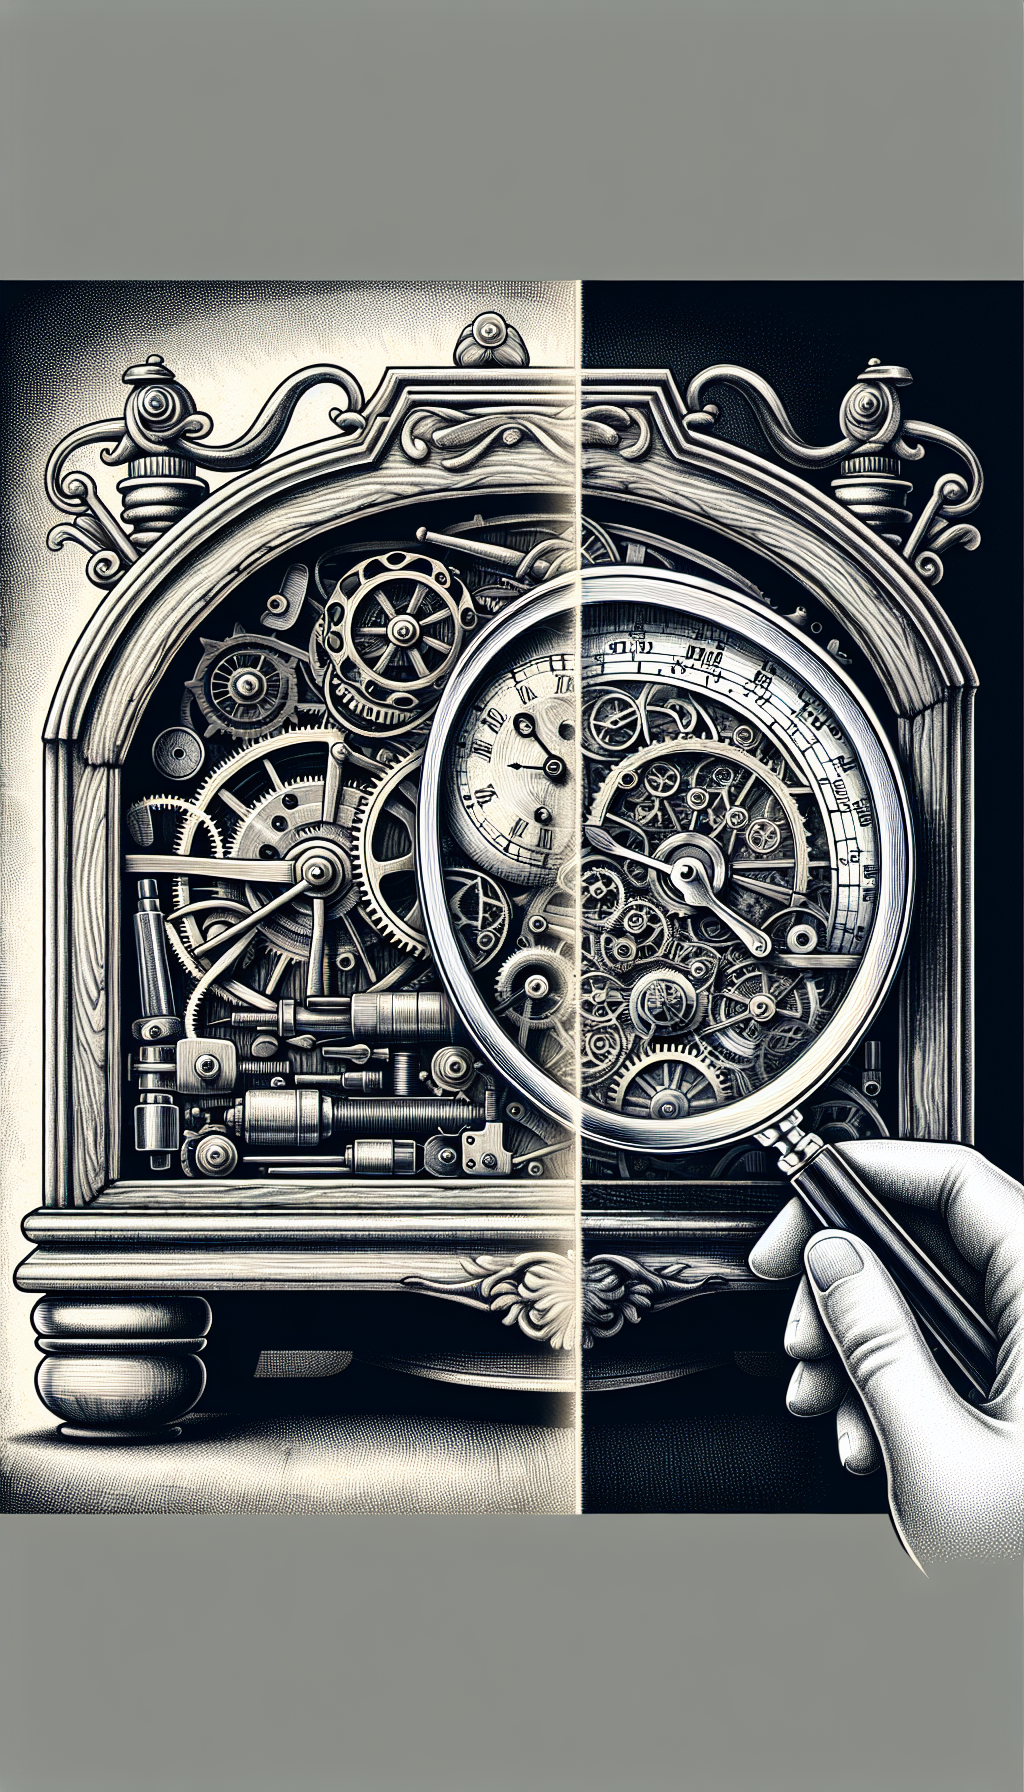 An intricate illustration that depicts a cross-section of an antique mantel clock, with half unveiling its inner cogs and artisan tools, emblematic of the timeless craftsmanship. On the other half, a magnifying glass hovers over unique maker's marks and materials, with stylistic touches ranging from realistic details to vintage etchings, symbolizing the identification process of rare antique timepieces.